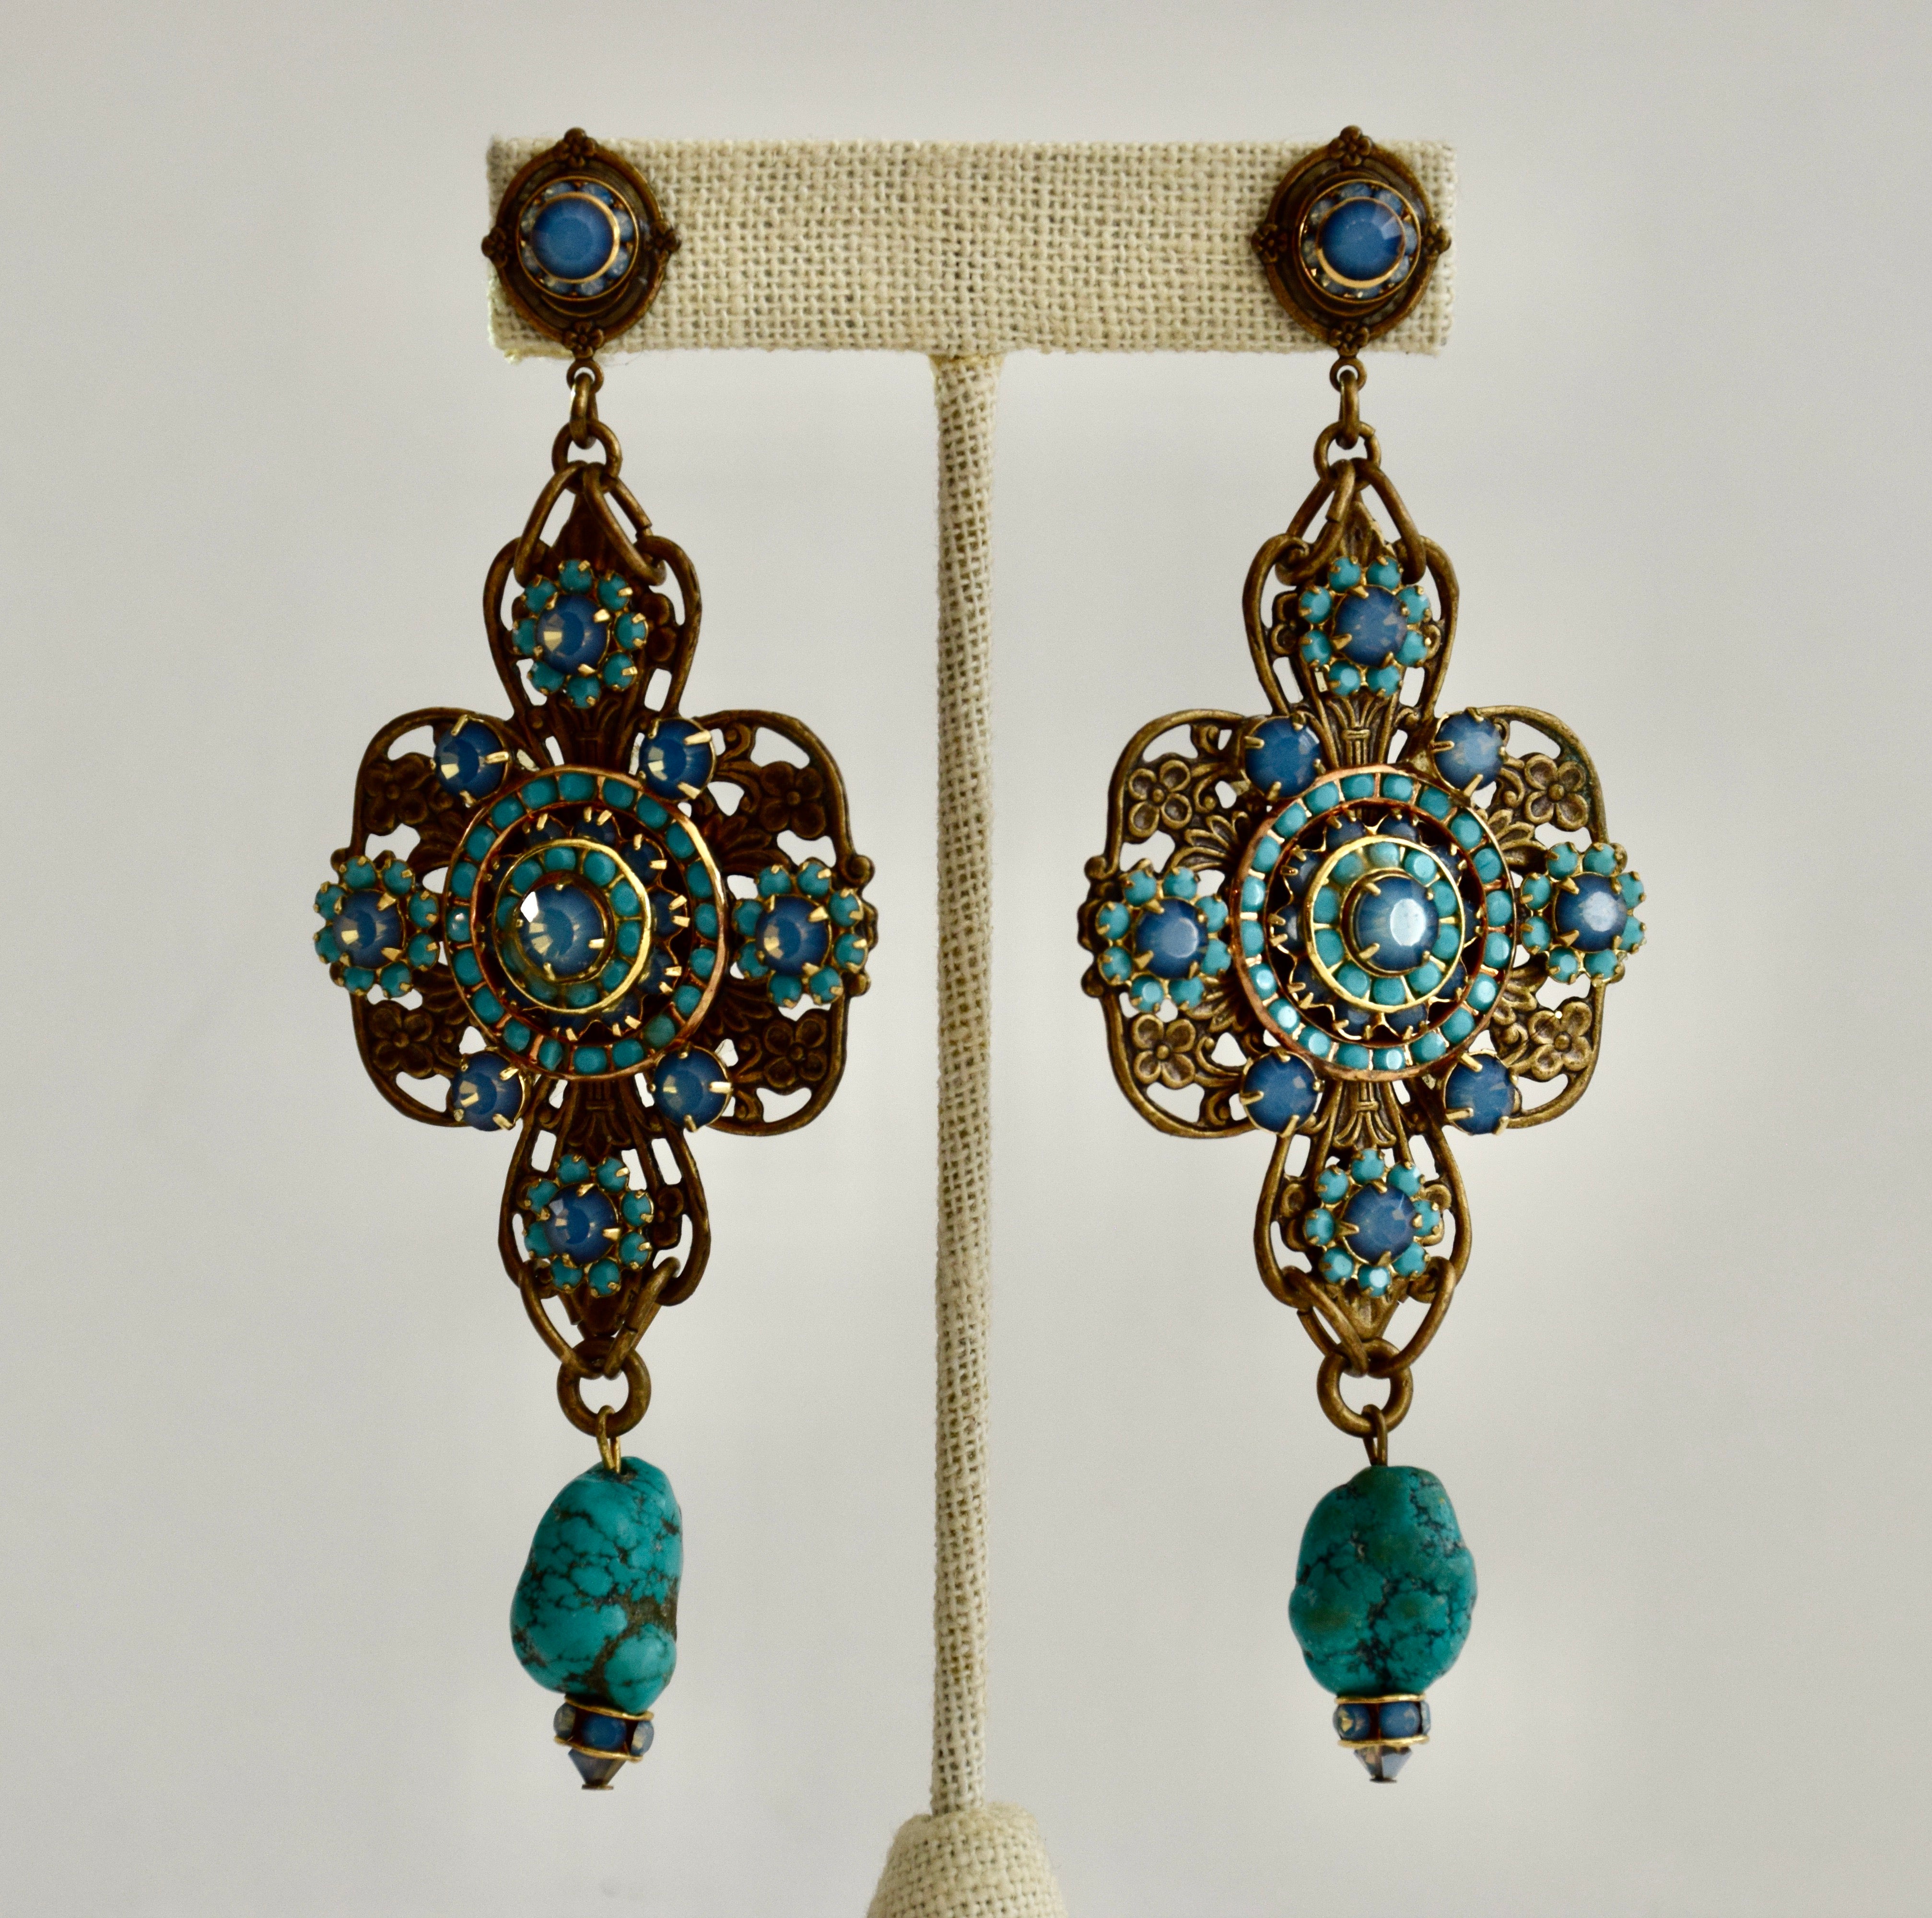 RGS-E001: Handcrafted Crystal Earrings